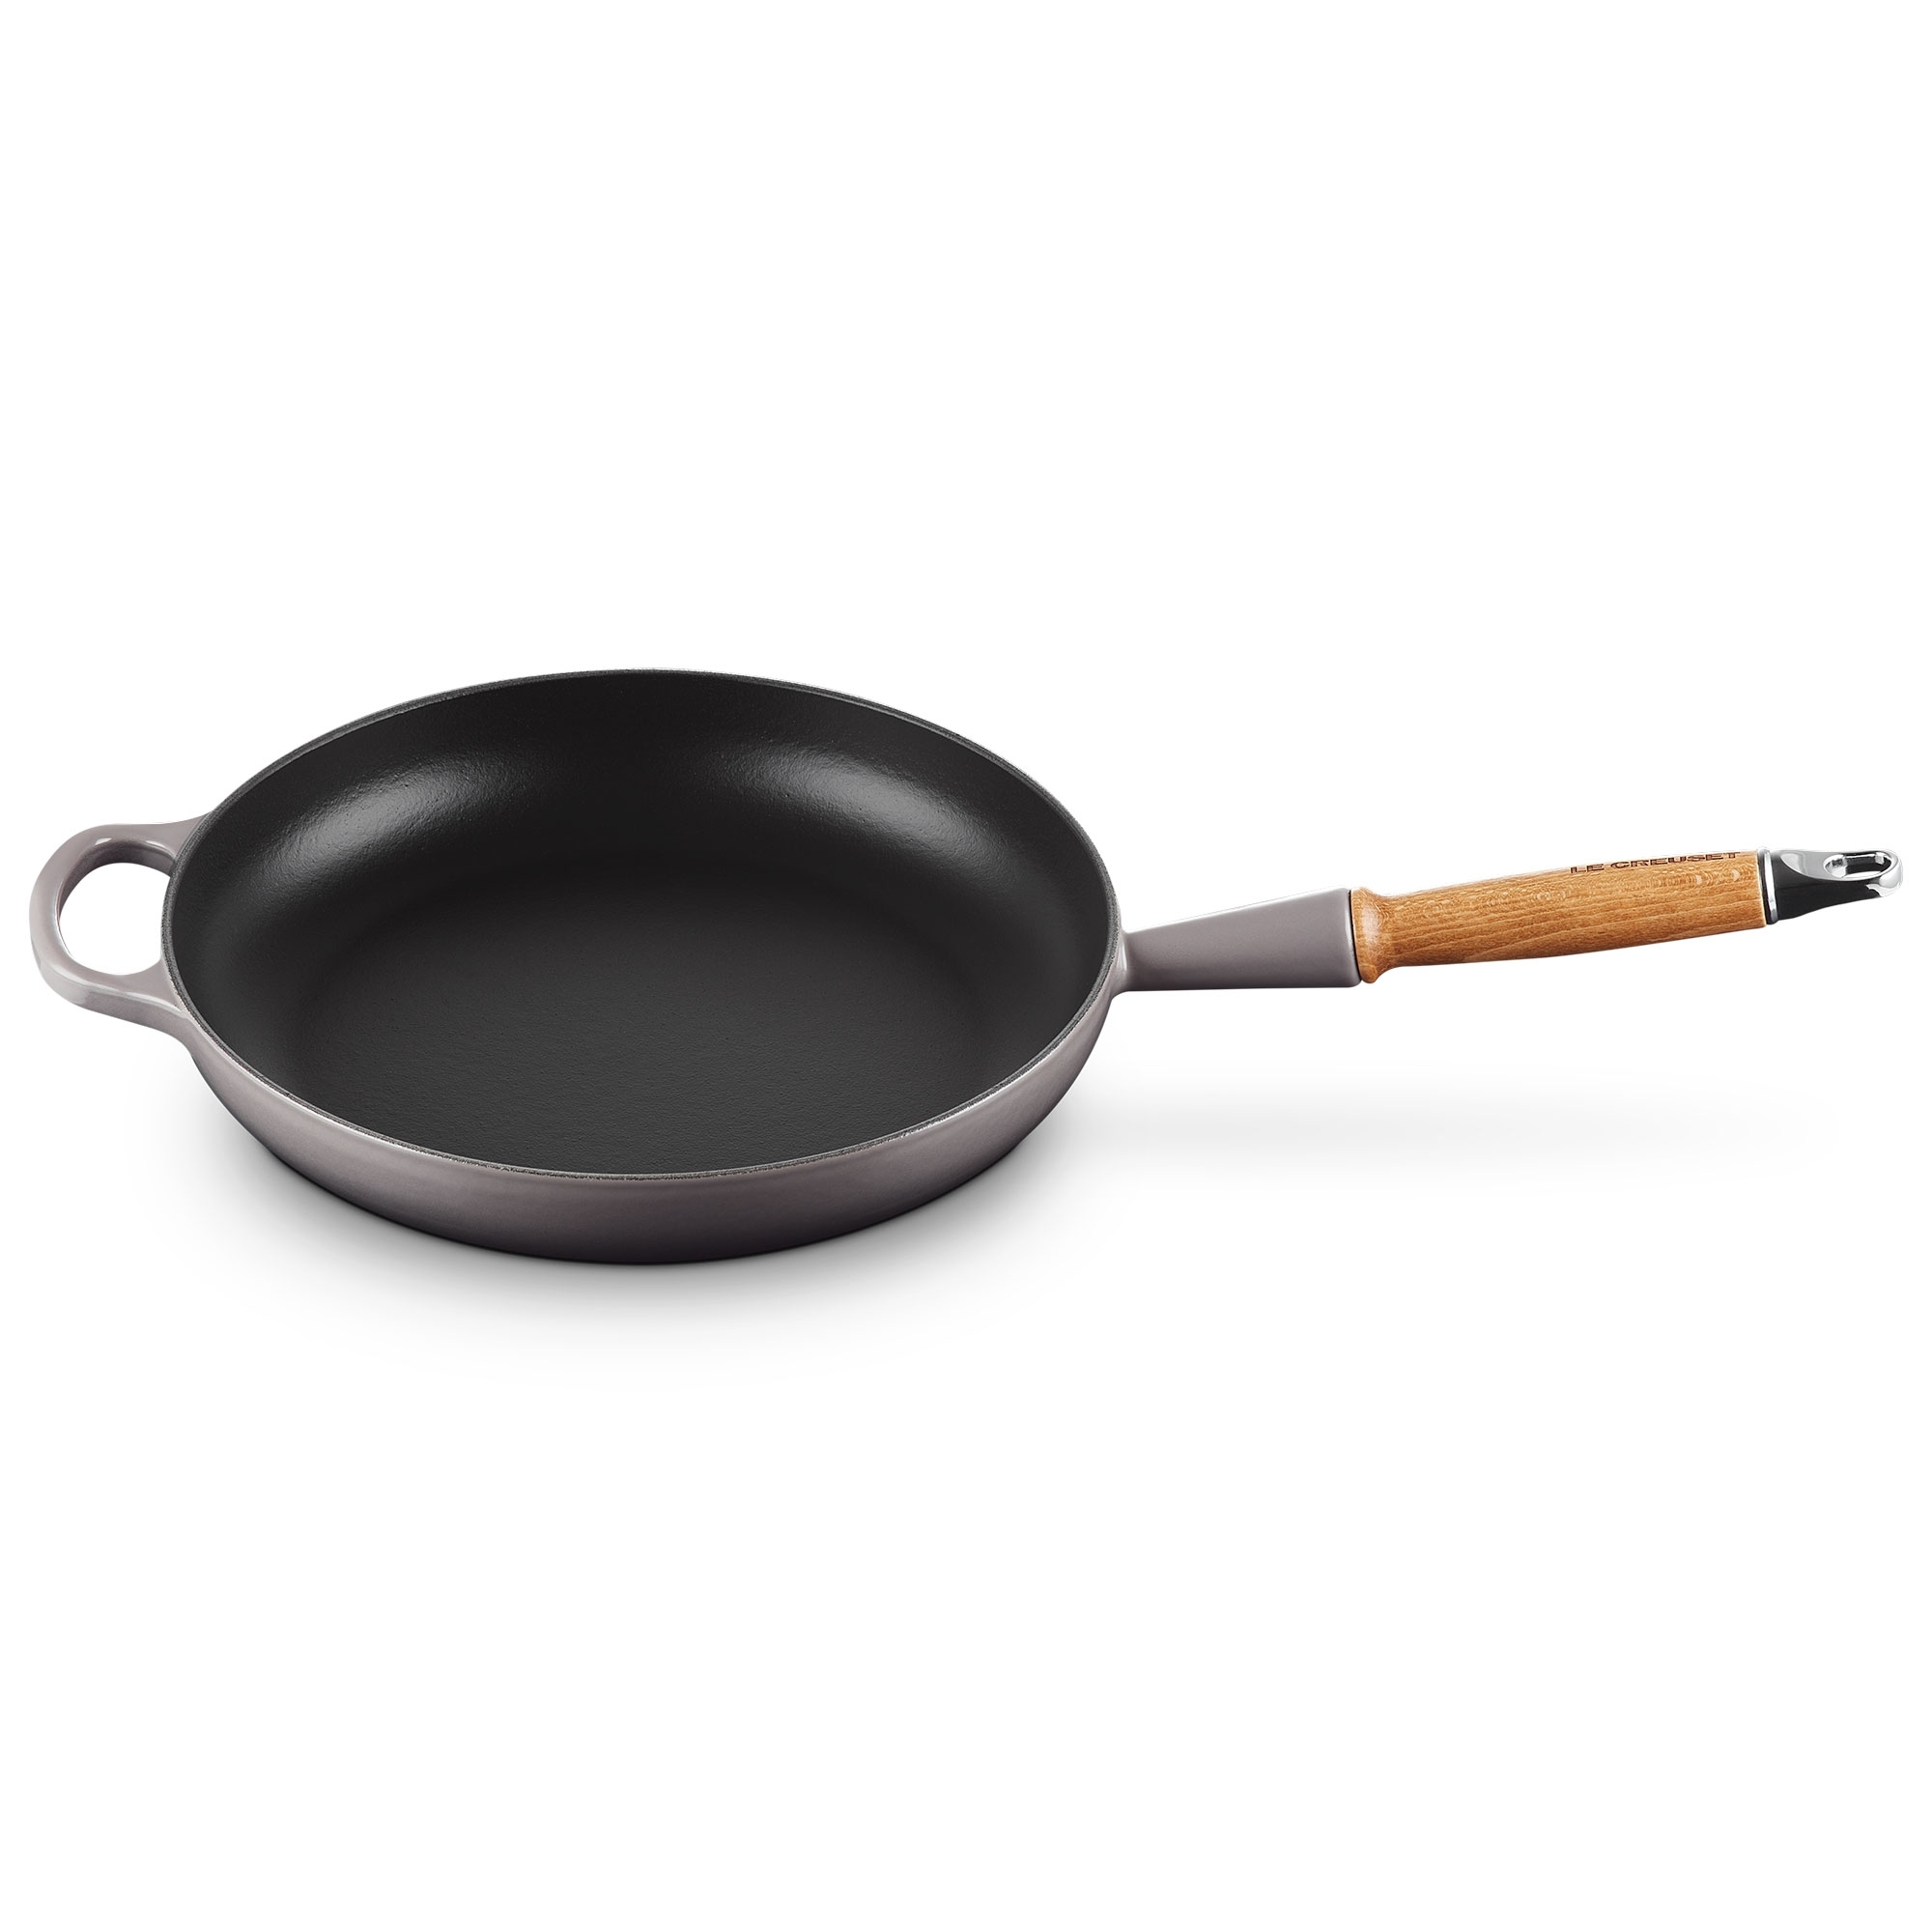 Le Creuset - Frying Pan with Wooden Handle